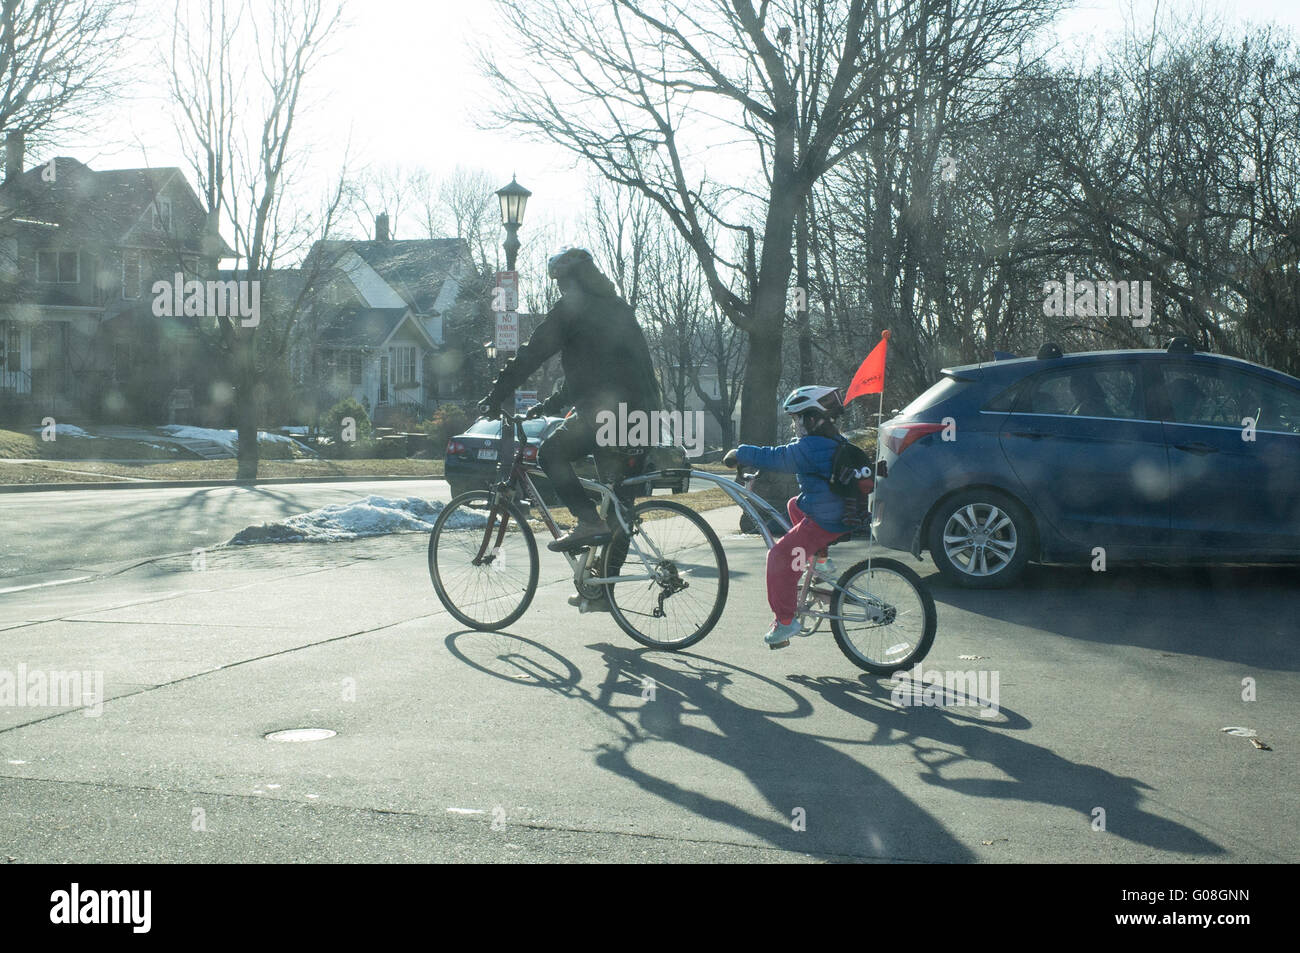 Father and daughter riding tandem bicycle with orange warning flag. St Paul Minnesota MN USA Stock Photo